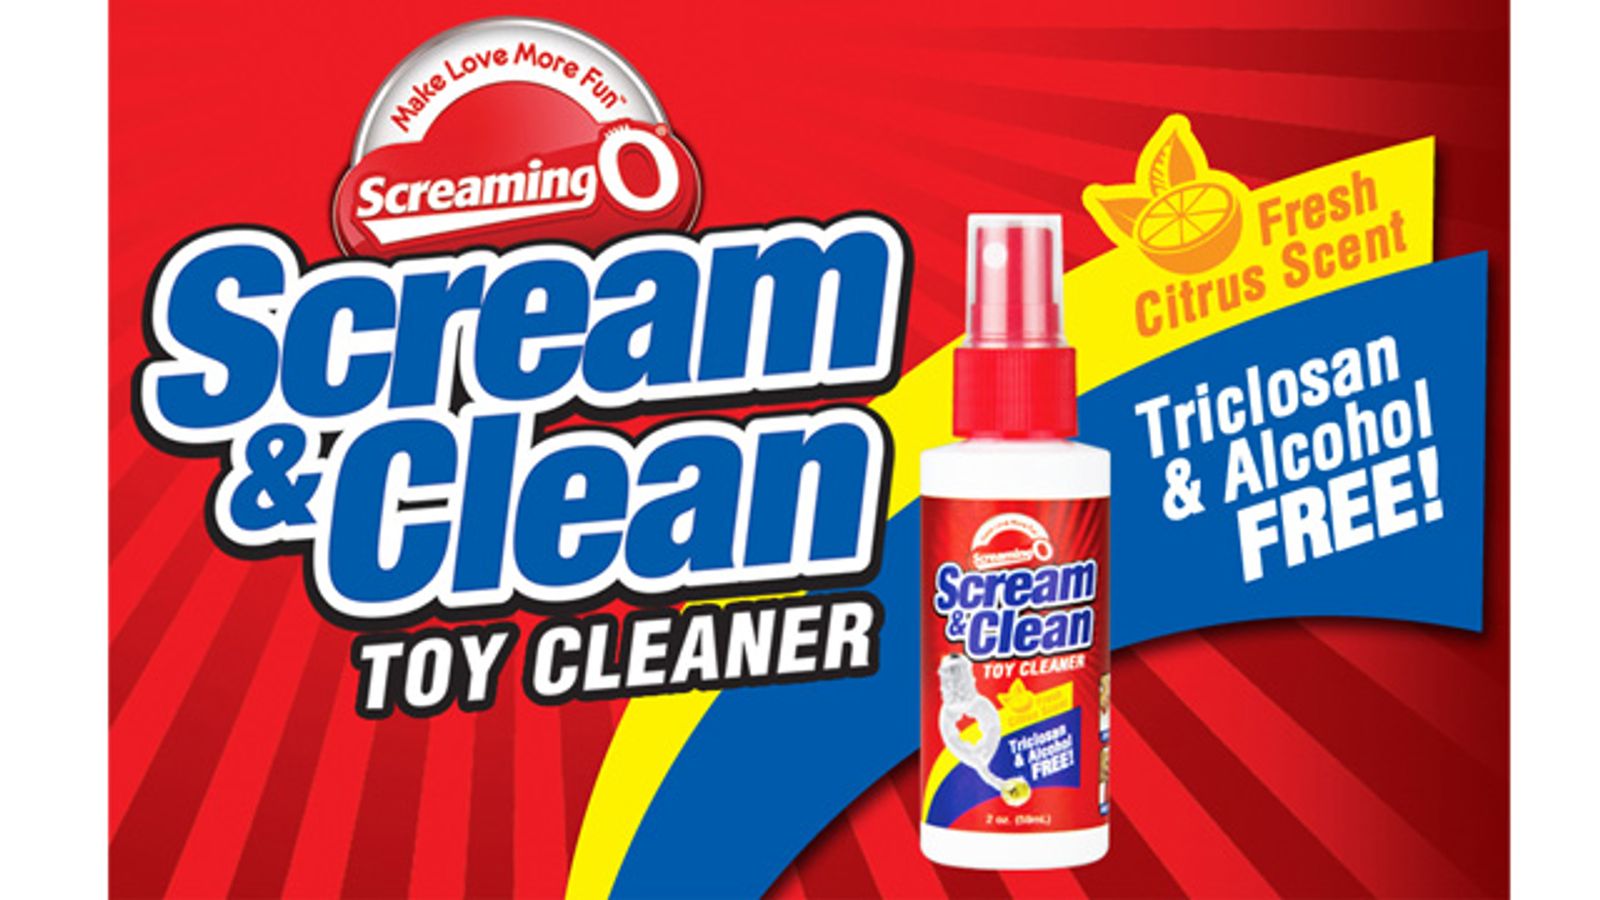 The Screaming O Keeps Sex Toys Sanitary, Sparkling with Scream & Clean